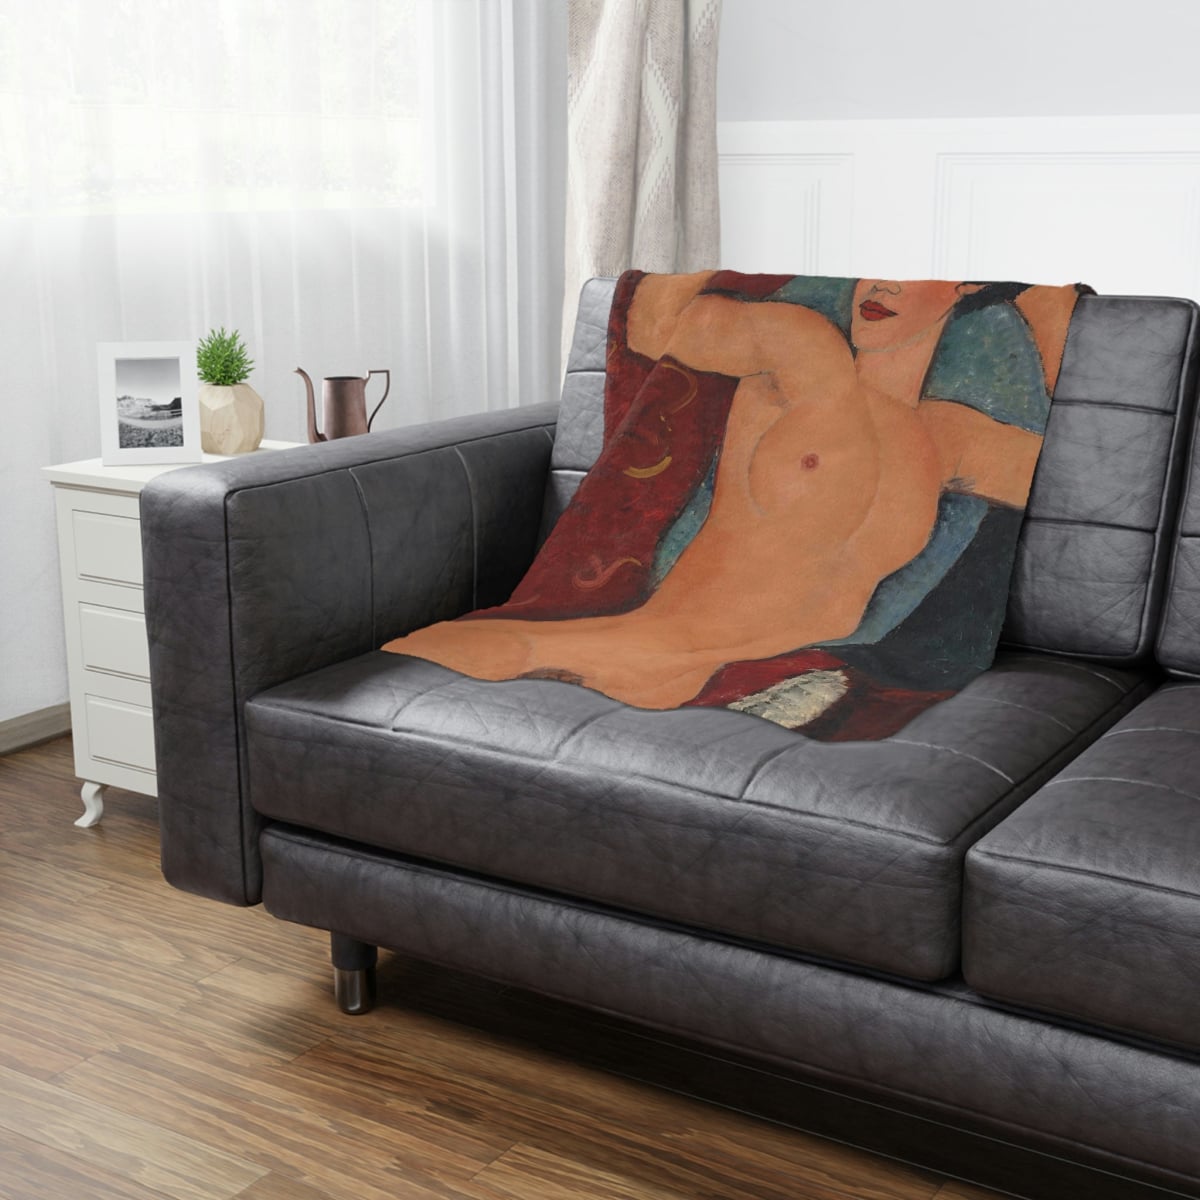 Cozy up in art with the 'Nu couché' by Amedeo Modigliani Art Blanket